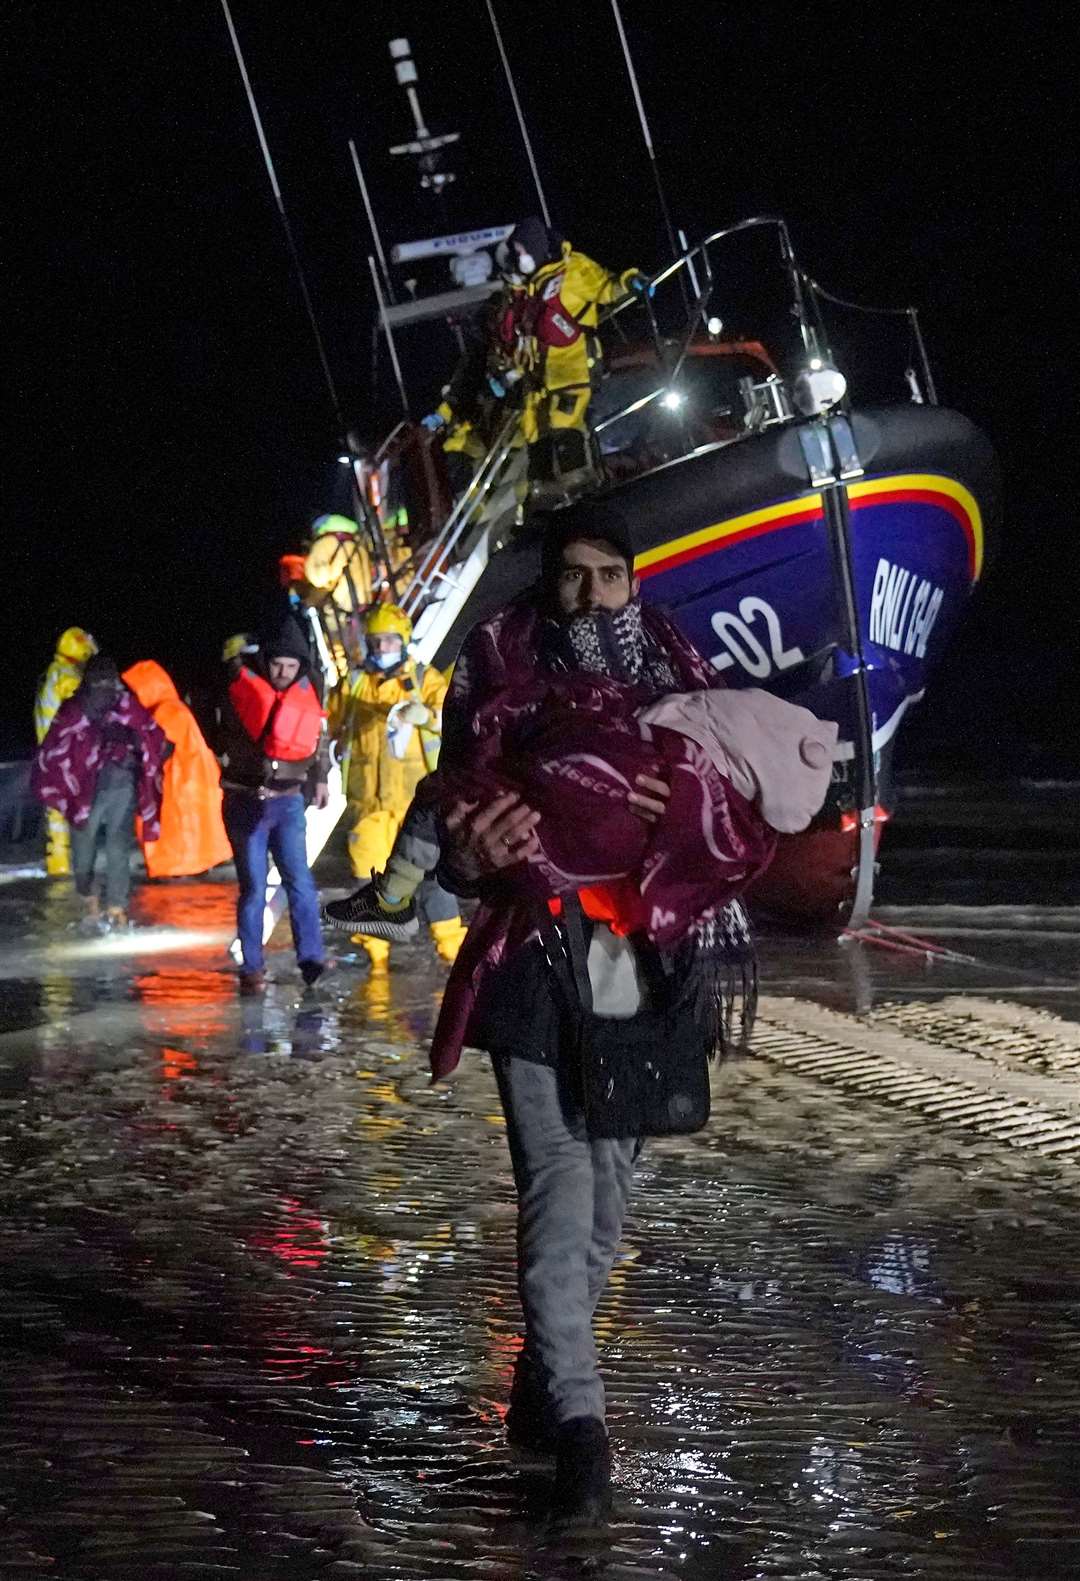 (PA/ Gareth Fuller) A man carries a baby as a group of people thought to be migrants are brought in to Dungeness, Kent, after being rescued by the RNLI